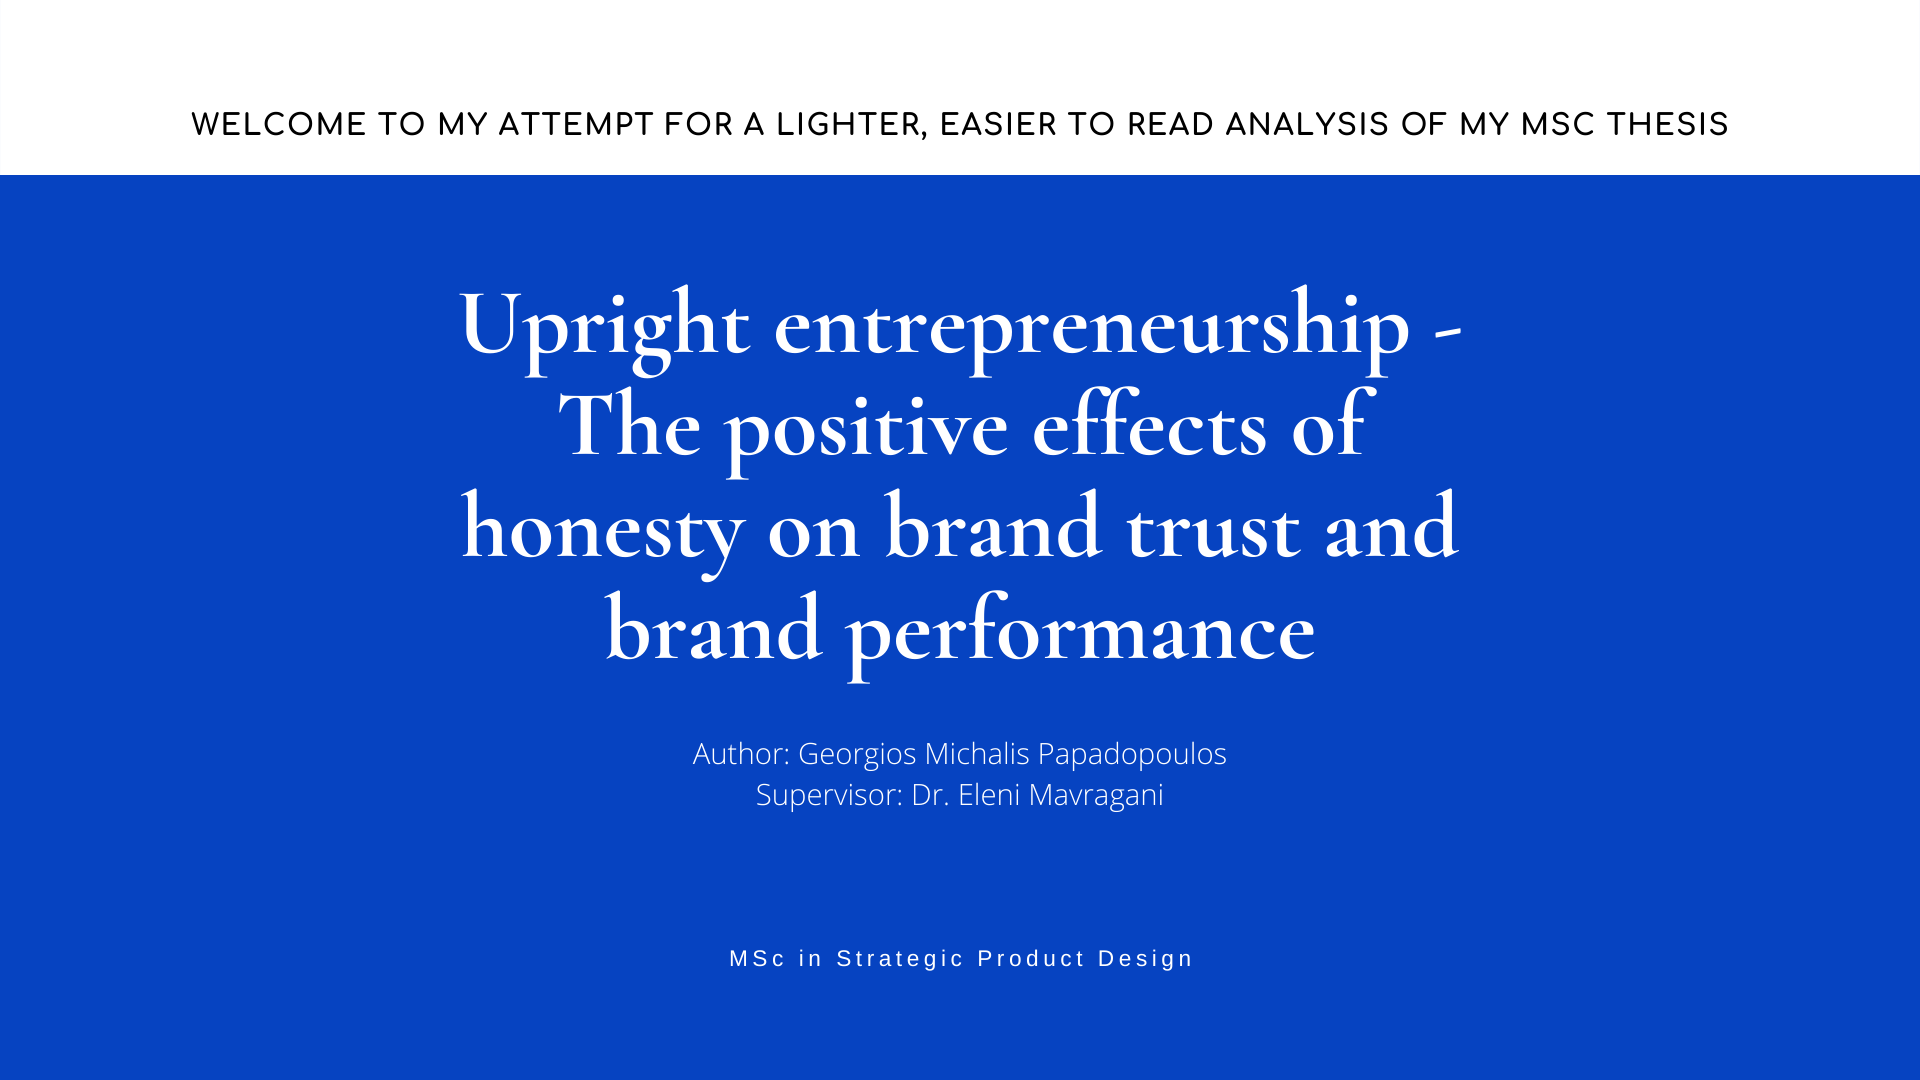 Upright entrepreneurship - The positive effects of honesty on brand trust and brand performance